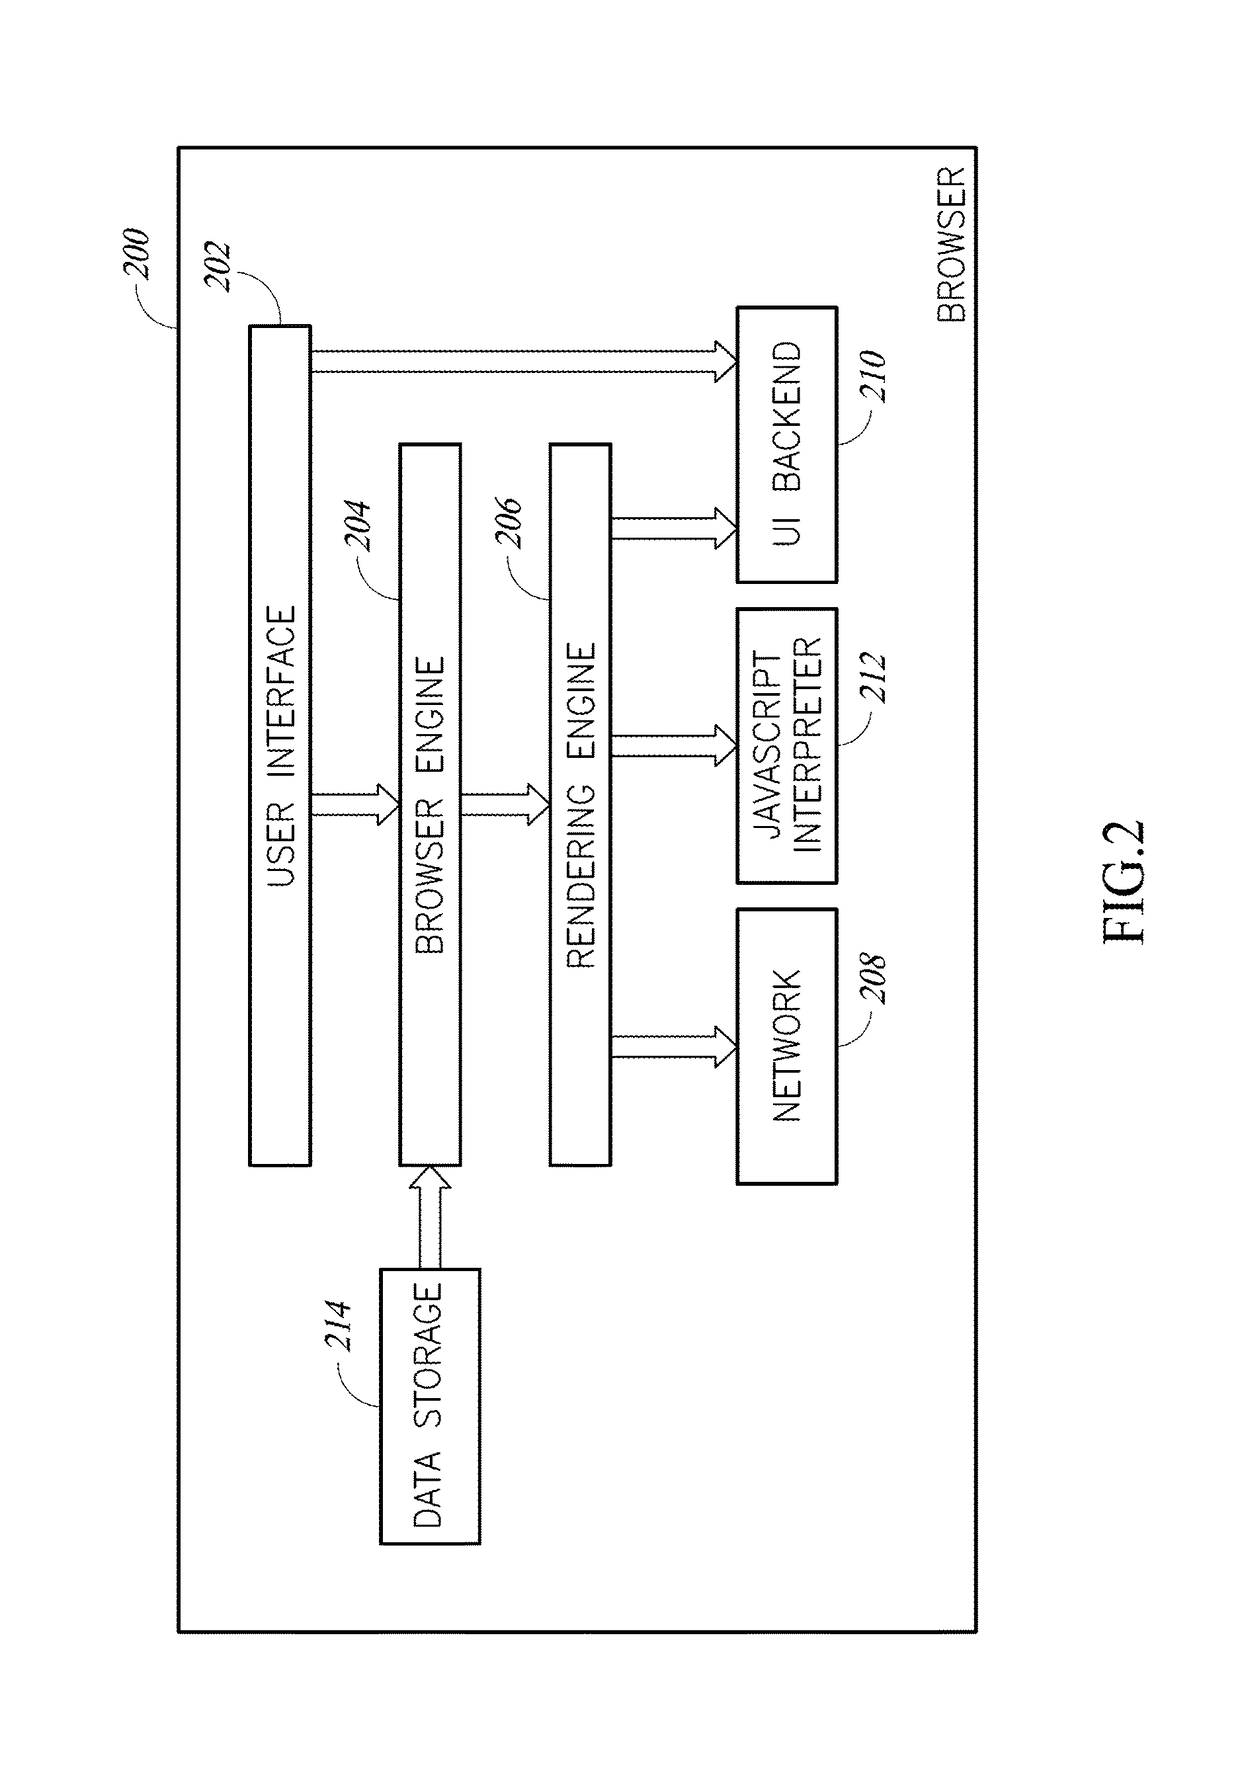 Performance testing of web application components using image differentiation